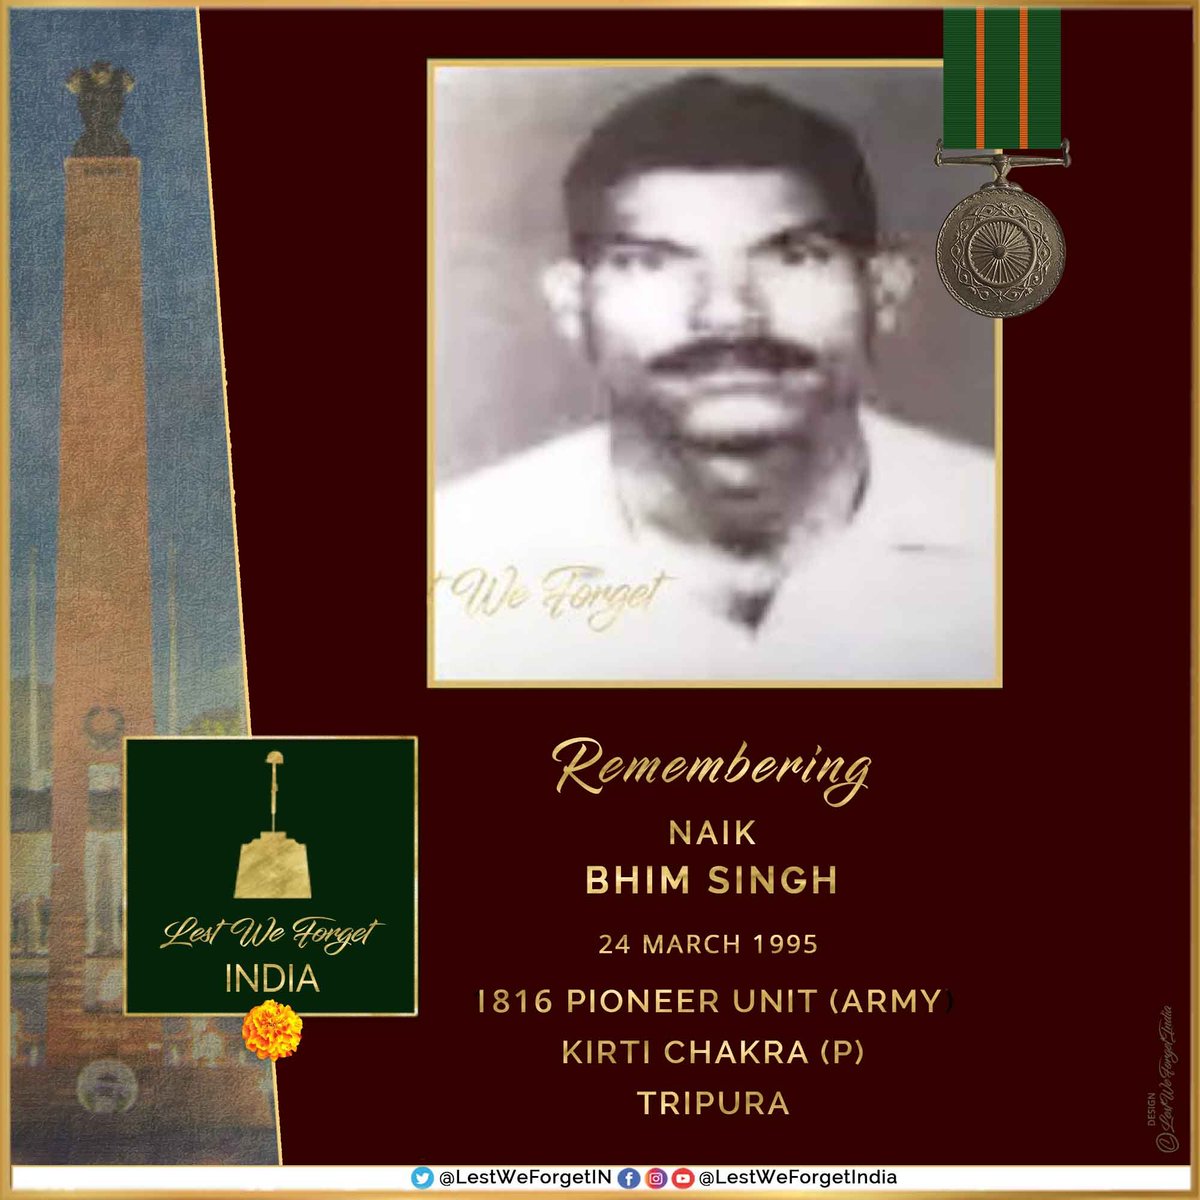 #LestWeForgetIndia🇮🇳 the gallantry & supreme sacrifice of Naik Bhim Singh, #KirtiChakra (P), 1816 Pioneer Unit in Tripura, #OnThisDay 24 March in 1995 The #IndianBrave on road protection duty was manning an LMG; continued to fire and engage insurgents in an ambush, till his…